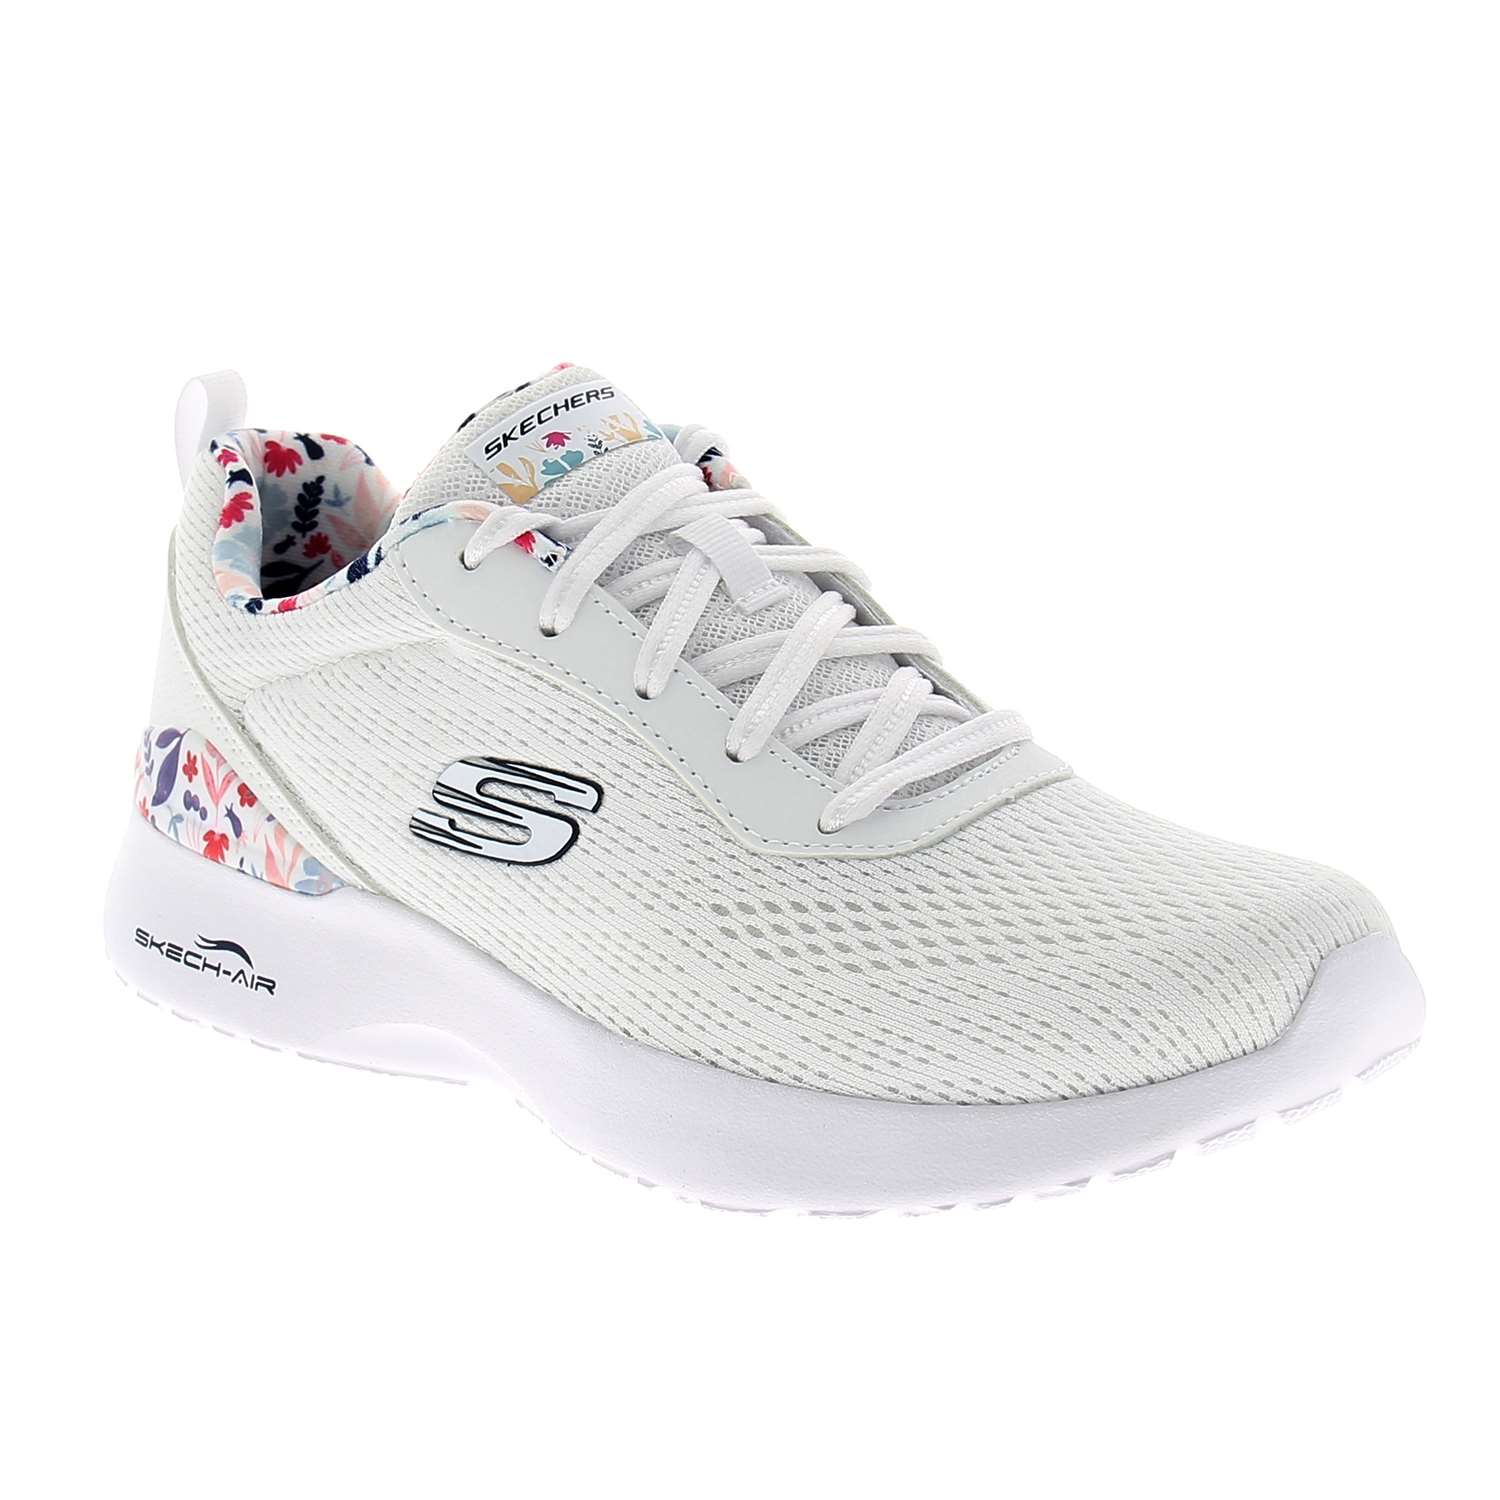 01 - SKECH AIR DYNAMIGHT - SKECHERS - Baskets - Textile